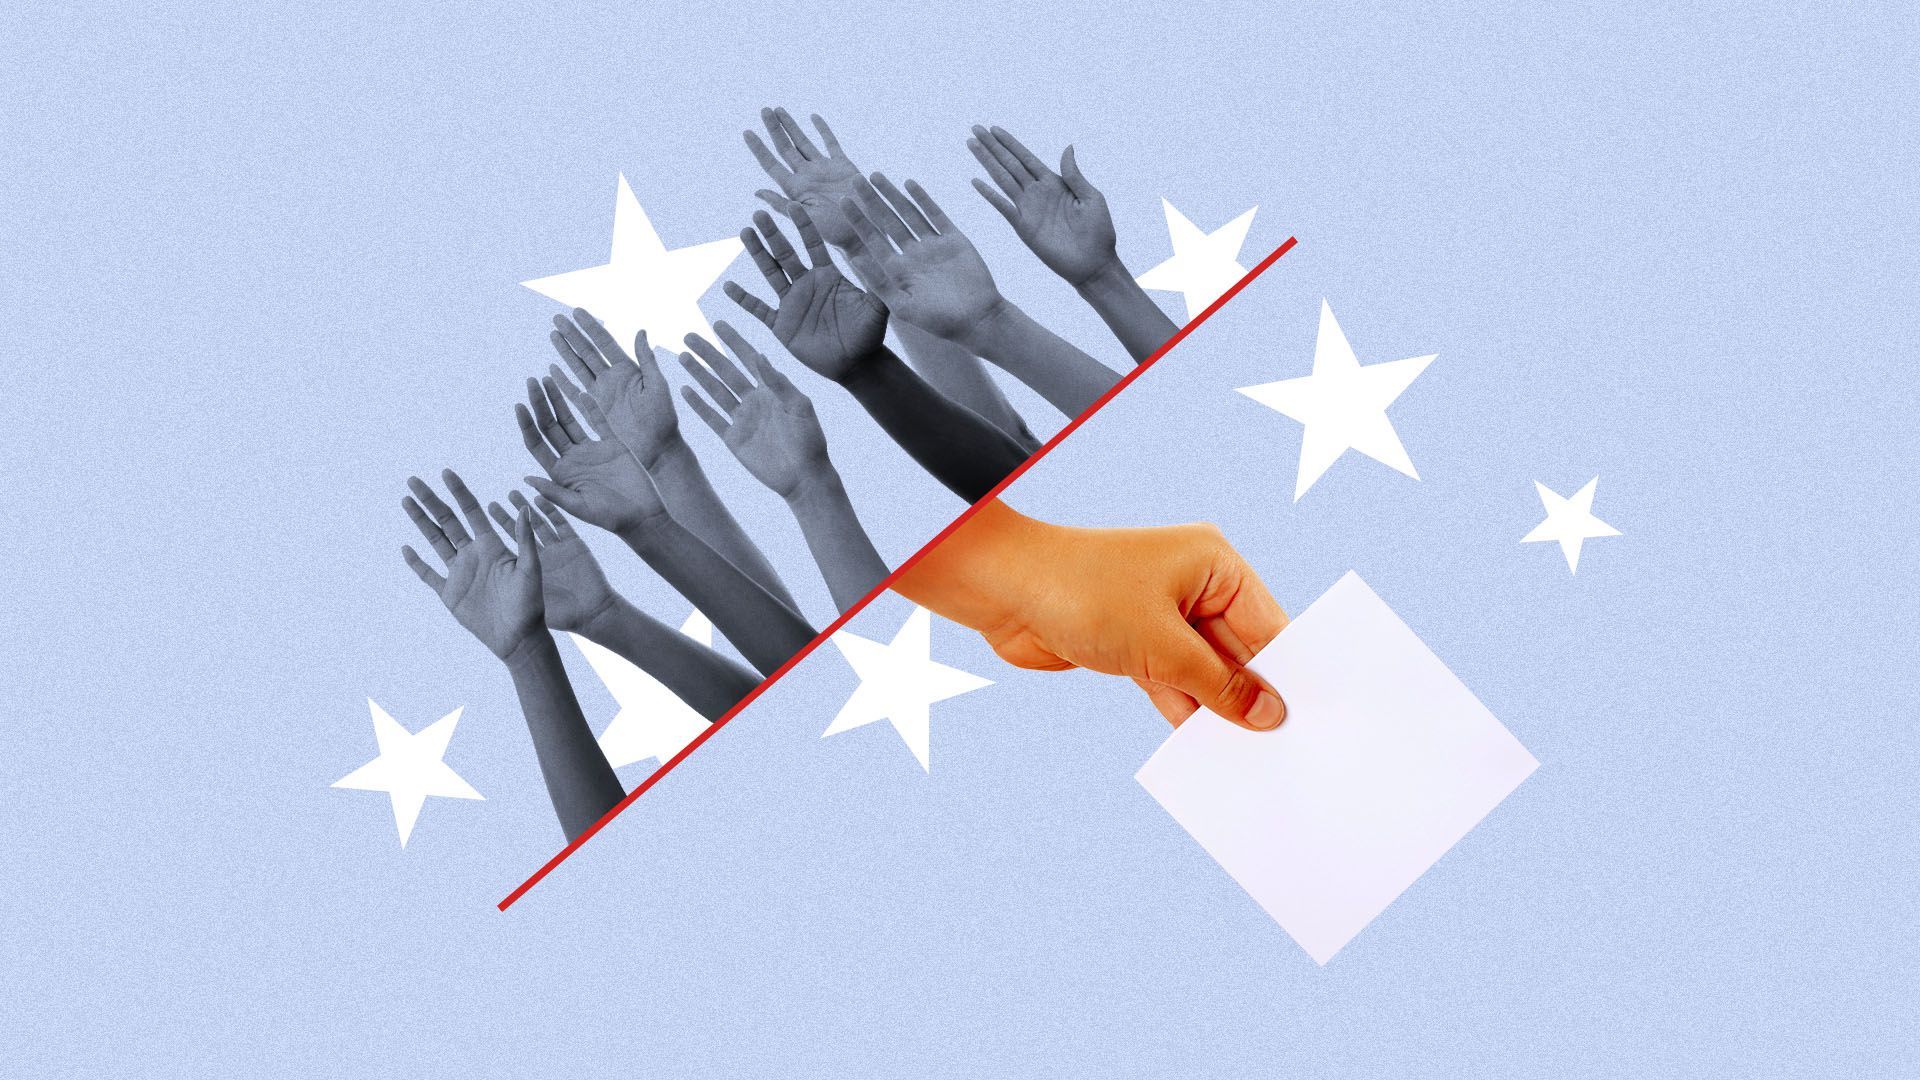 Illustration of a group of raised hands contrasted next to a single large hand voting